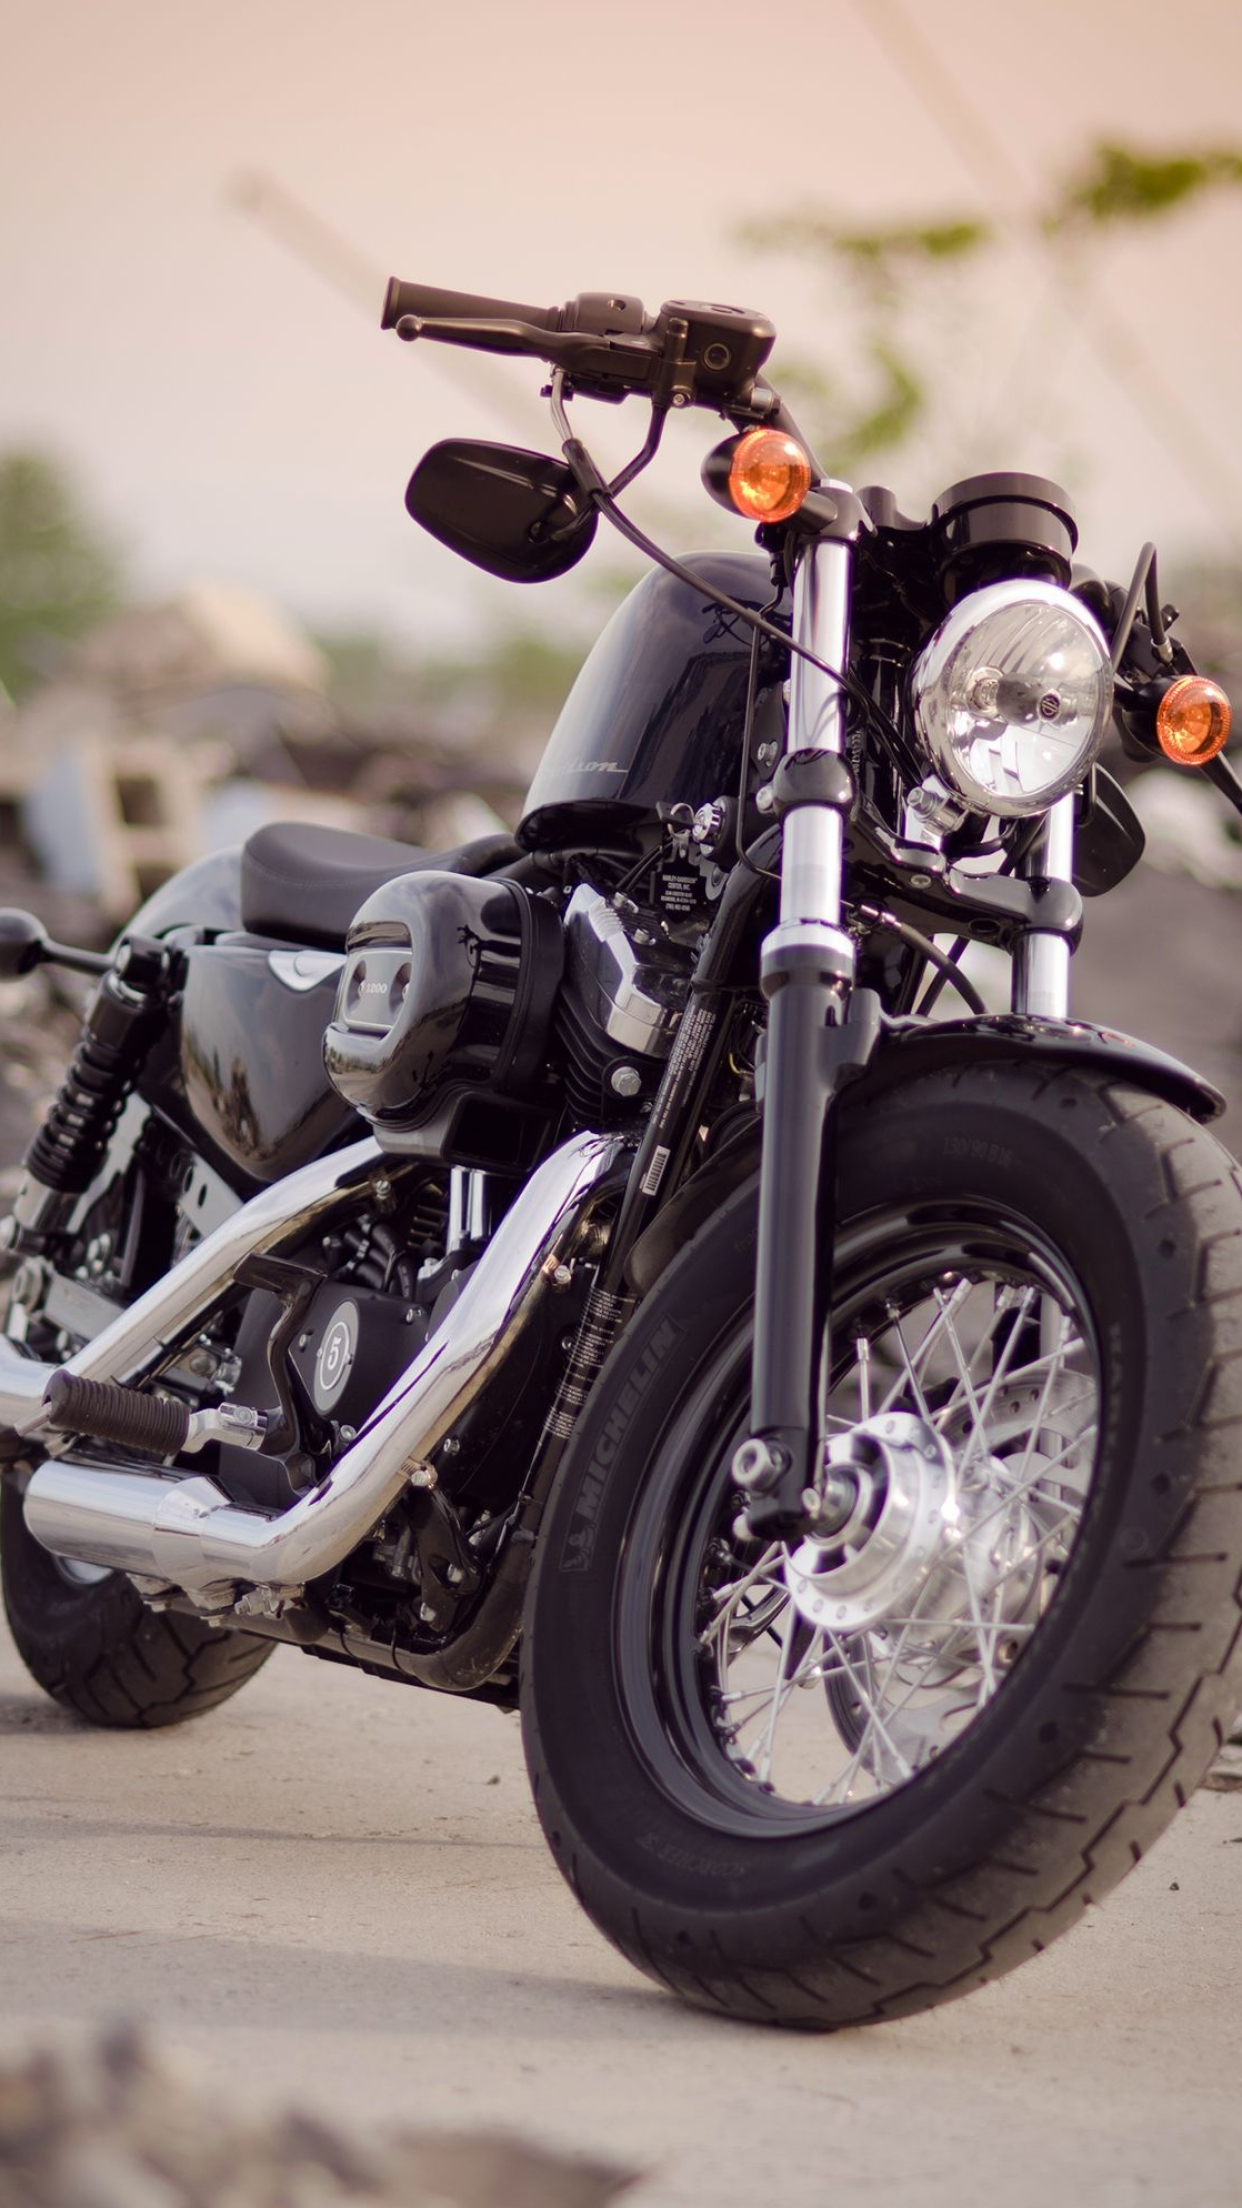 Harley-Davidson Iron 883, HD iPhone wallpapers, Motorcycle aesthetic, Stunning visuals, 1250x2210 HD Handy